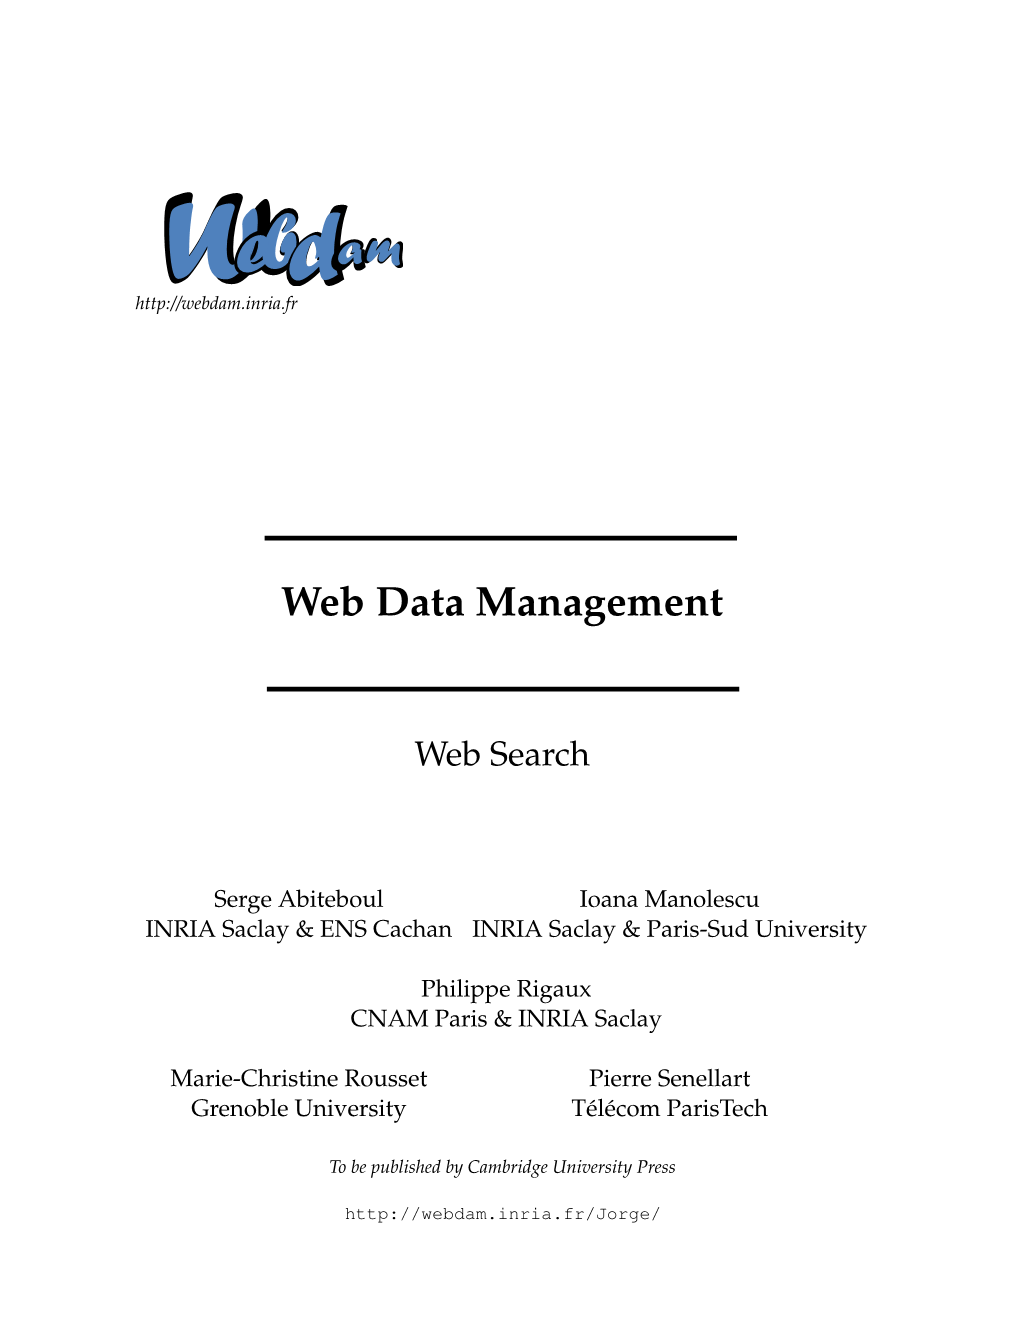 Chapter on Web Search